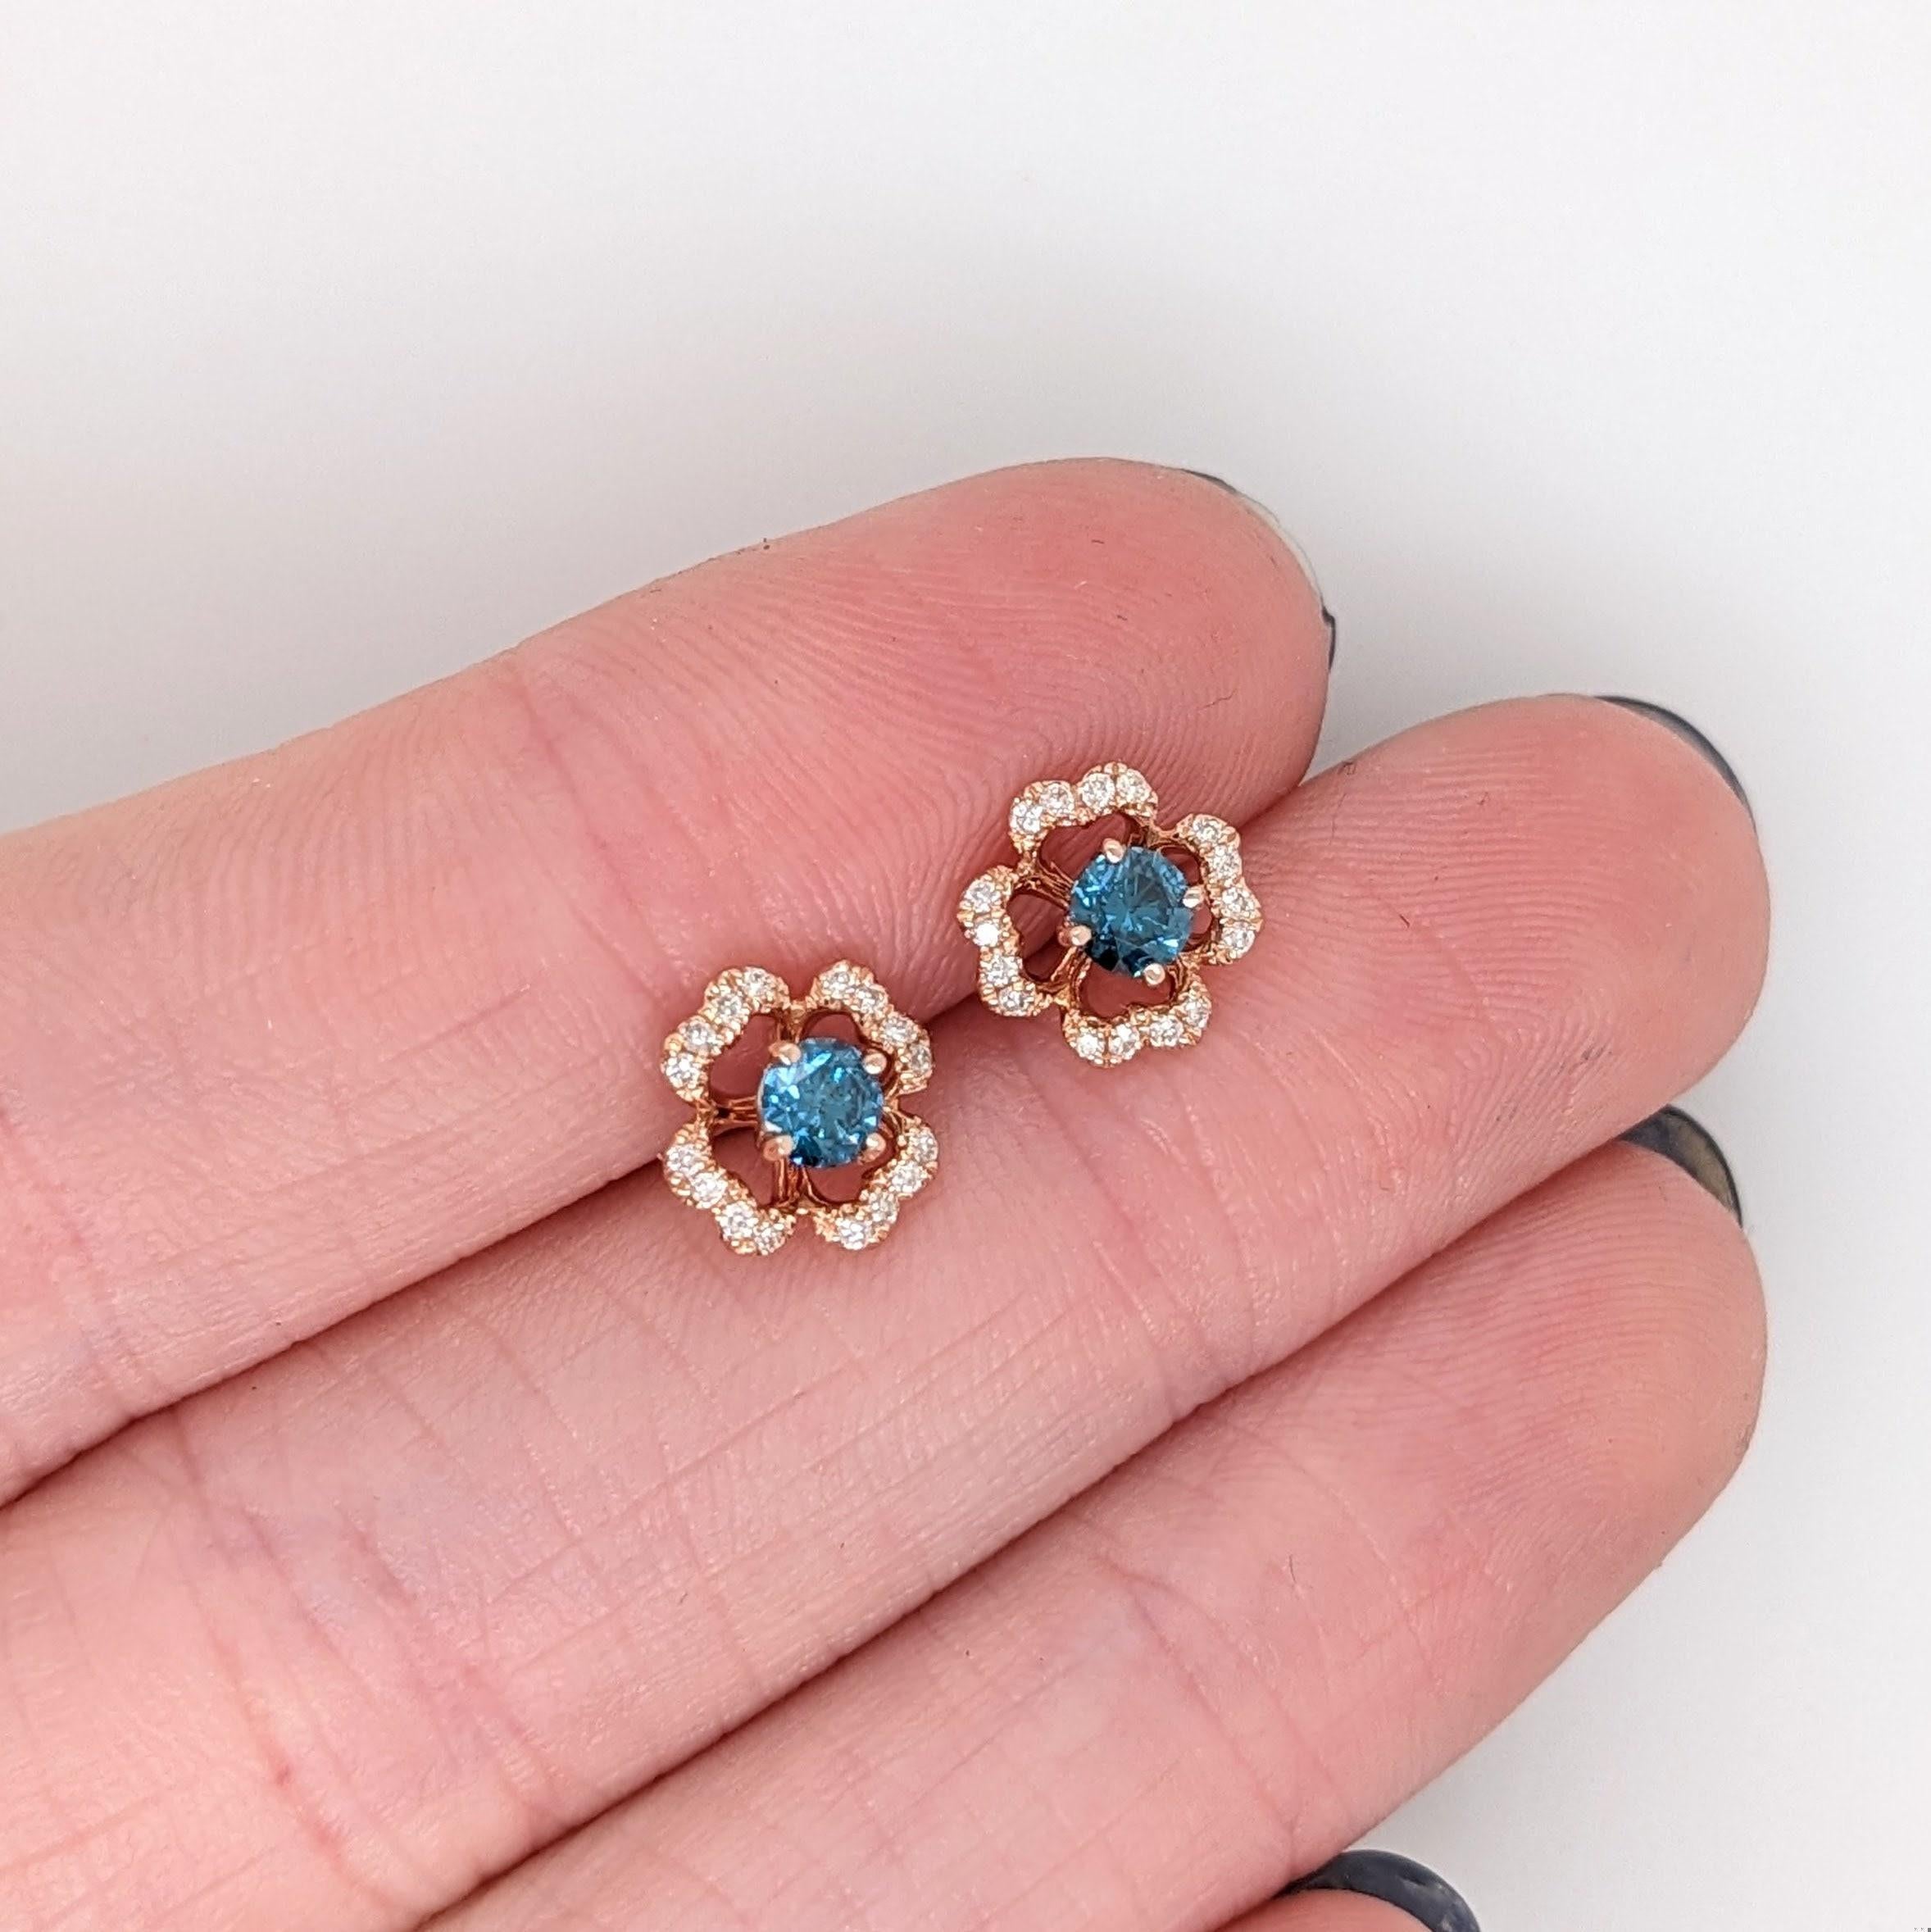 These beautiful stud earrings feature two 0.38 carat blue diamonds with natural earth mined diamonds all set in solid 14K rose gold. These earrings make a beautiful april birthstone gift for your loved ones! 

Specifications

Item Type: